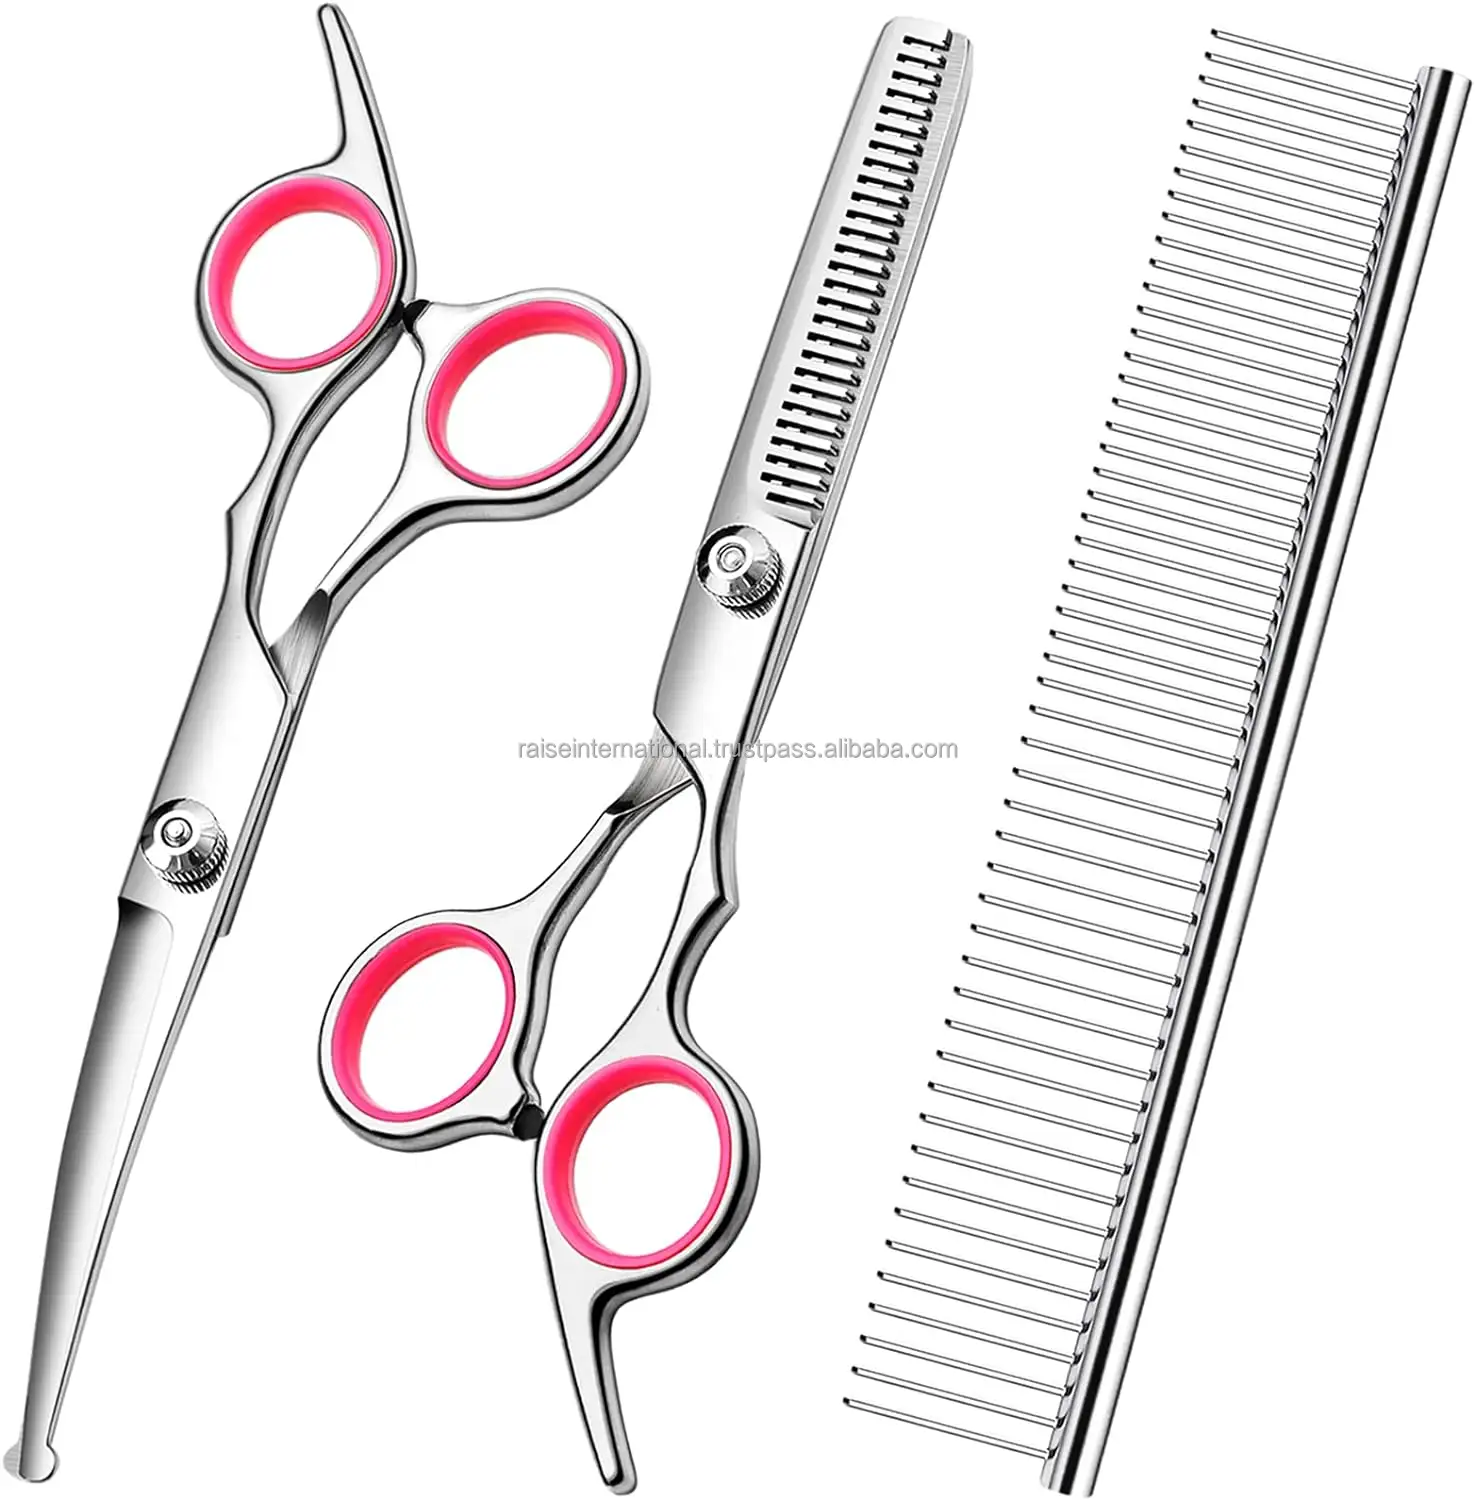 Grooming Scissors With Safety Round Tips Stainless Steel Professional Dog Grooming Kit Thinning Curved Scissors & Comb For Pets